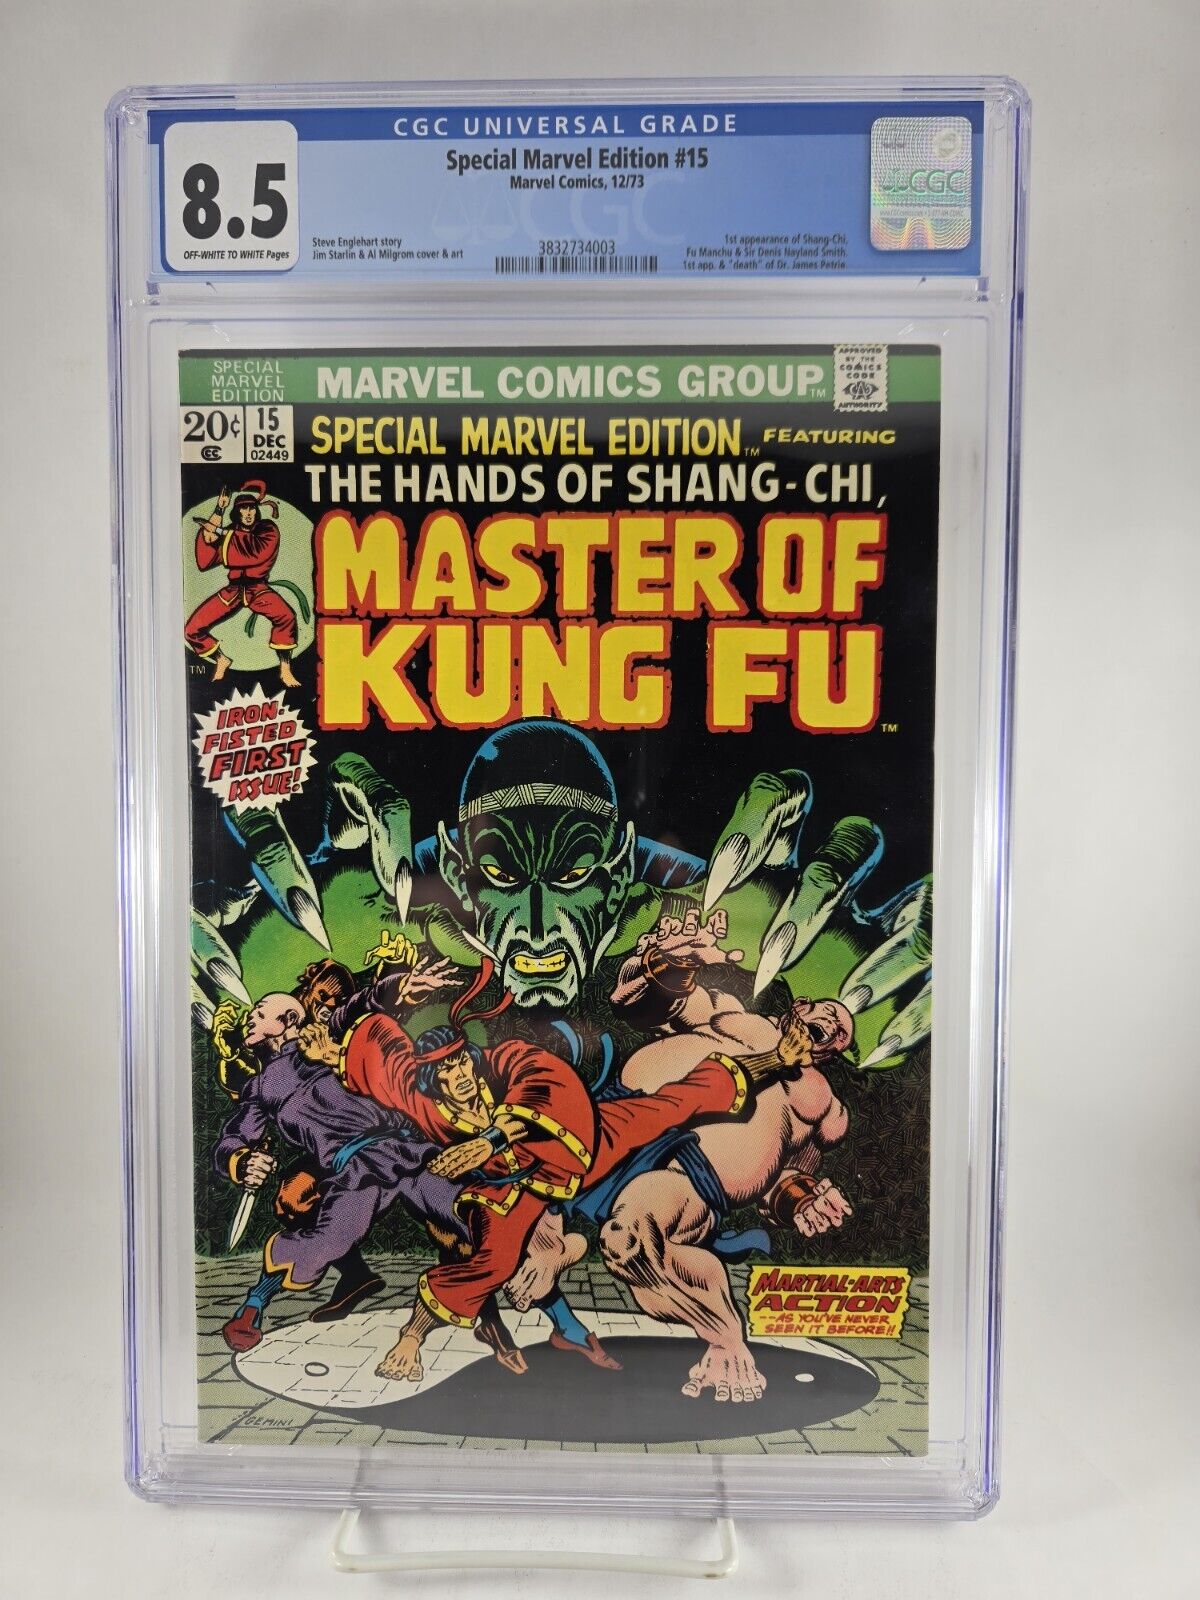 SPECIAL MARVEL EDITION #15 CGC 8.5 OW/W PAGES, 1ST APPEARANCE OF SHANG-CHI